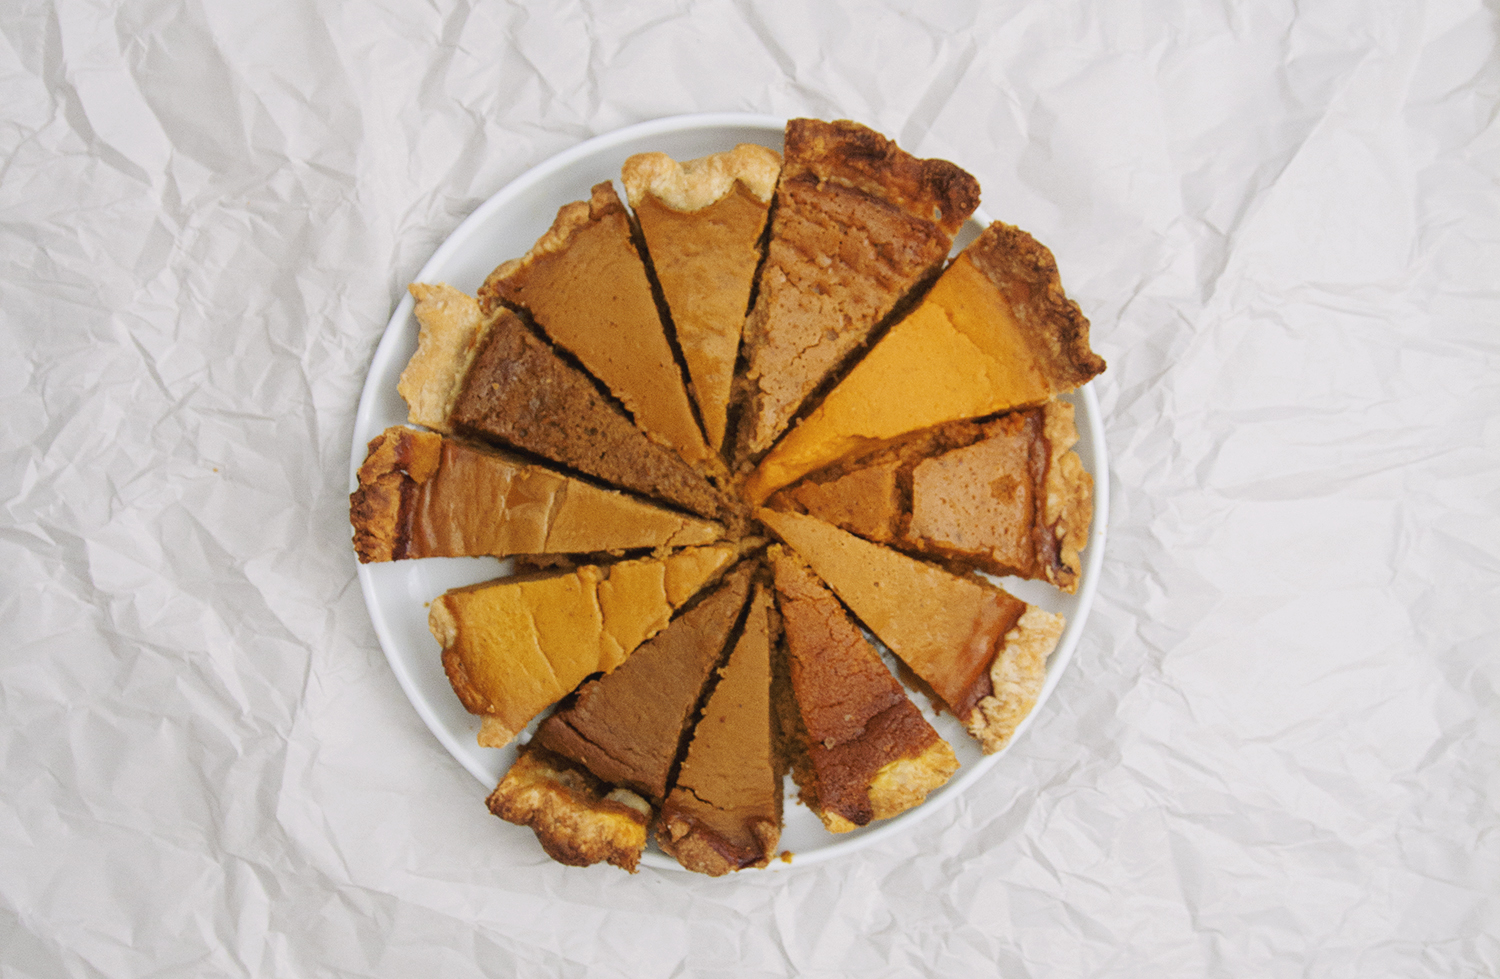 12 slices of different pumpkin pie recipes on white plate